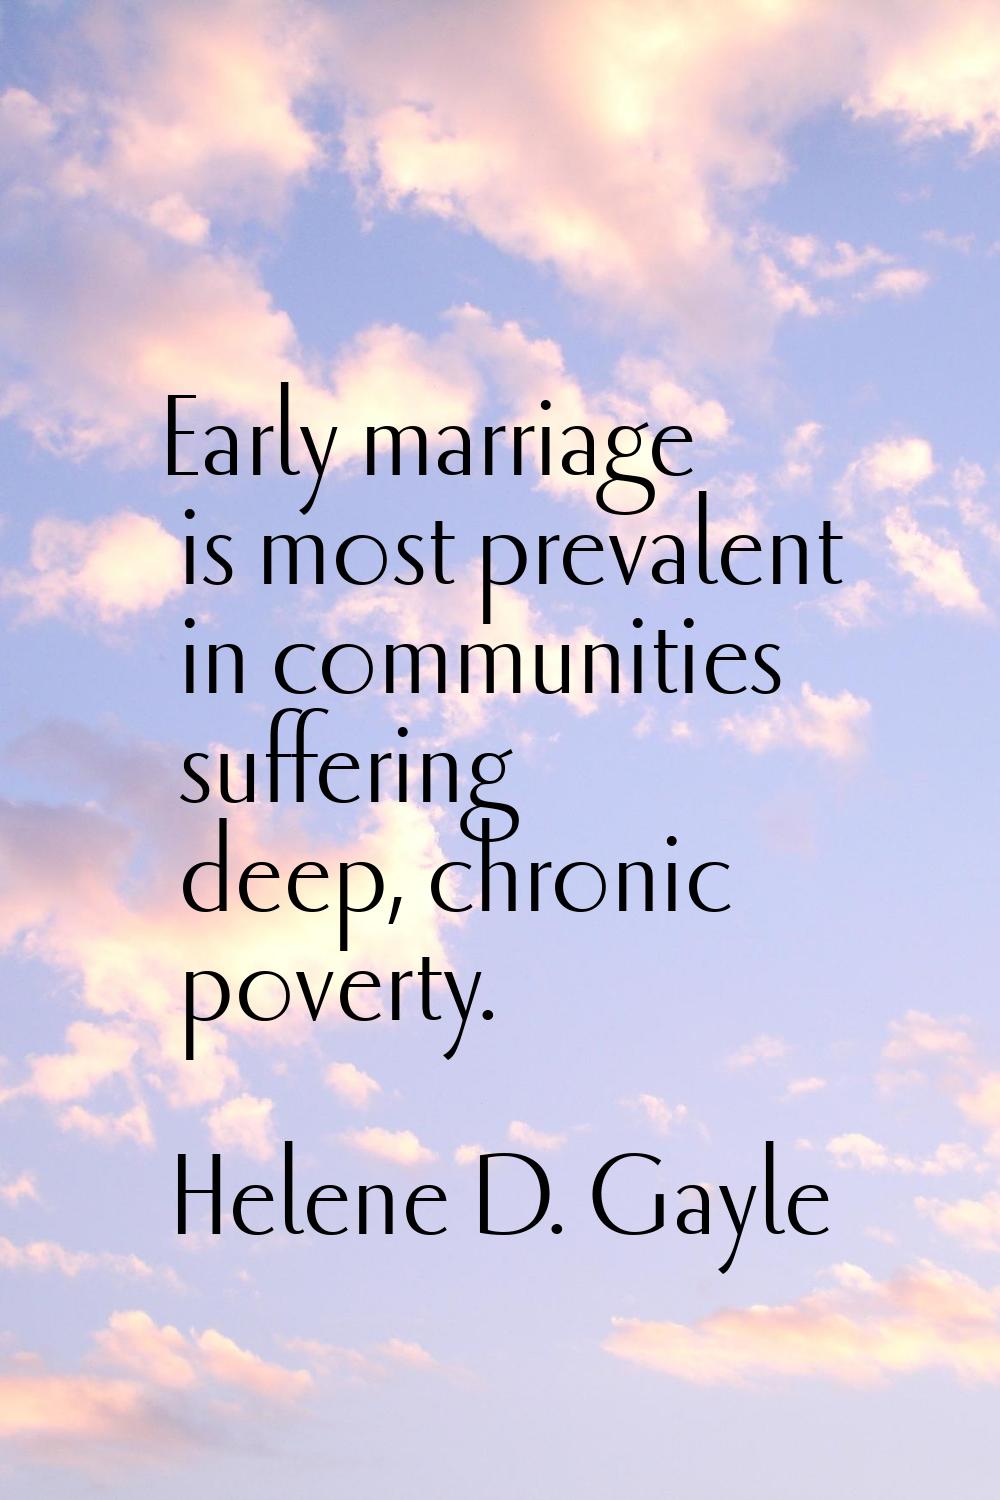 Early marriage is most prevalent in communities suffering deep, chronic poverty.